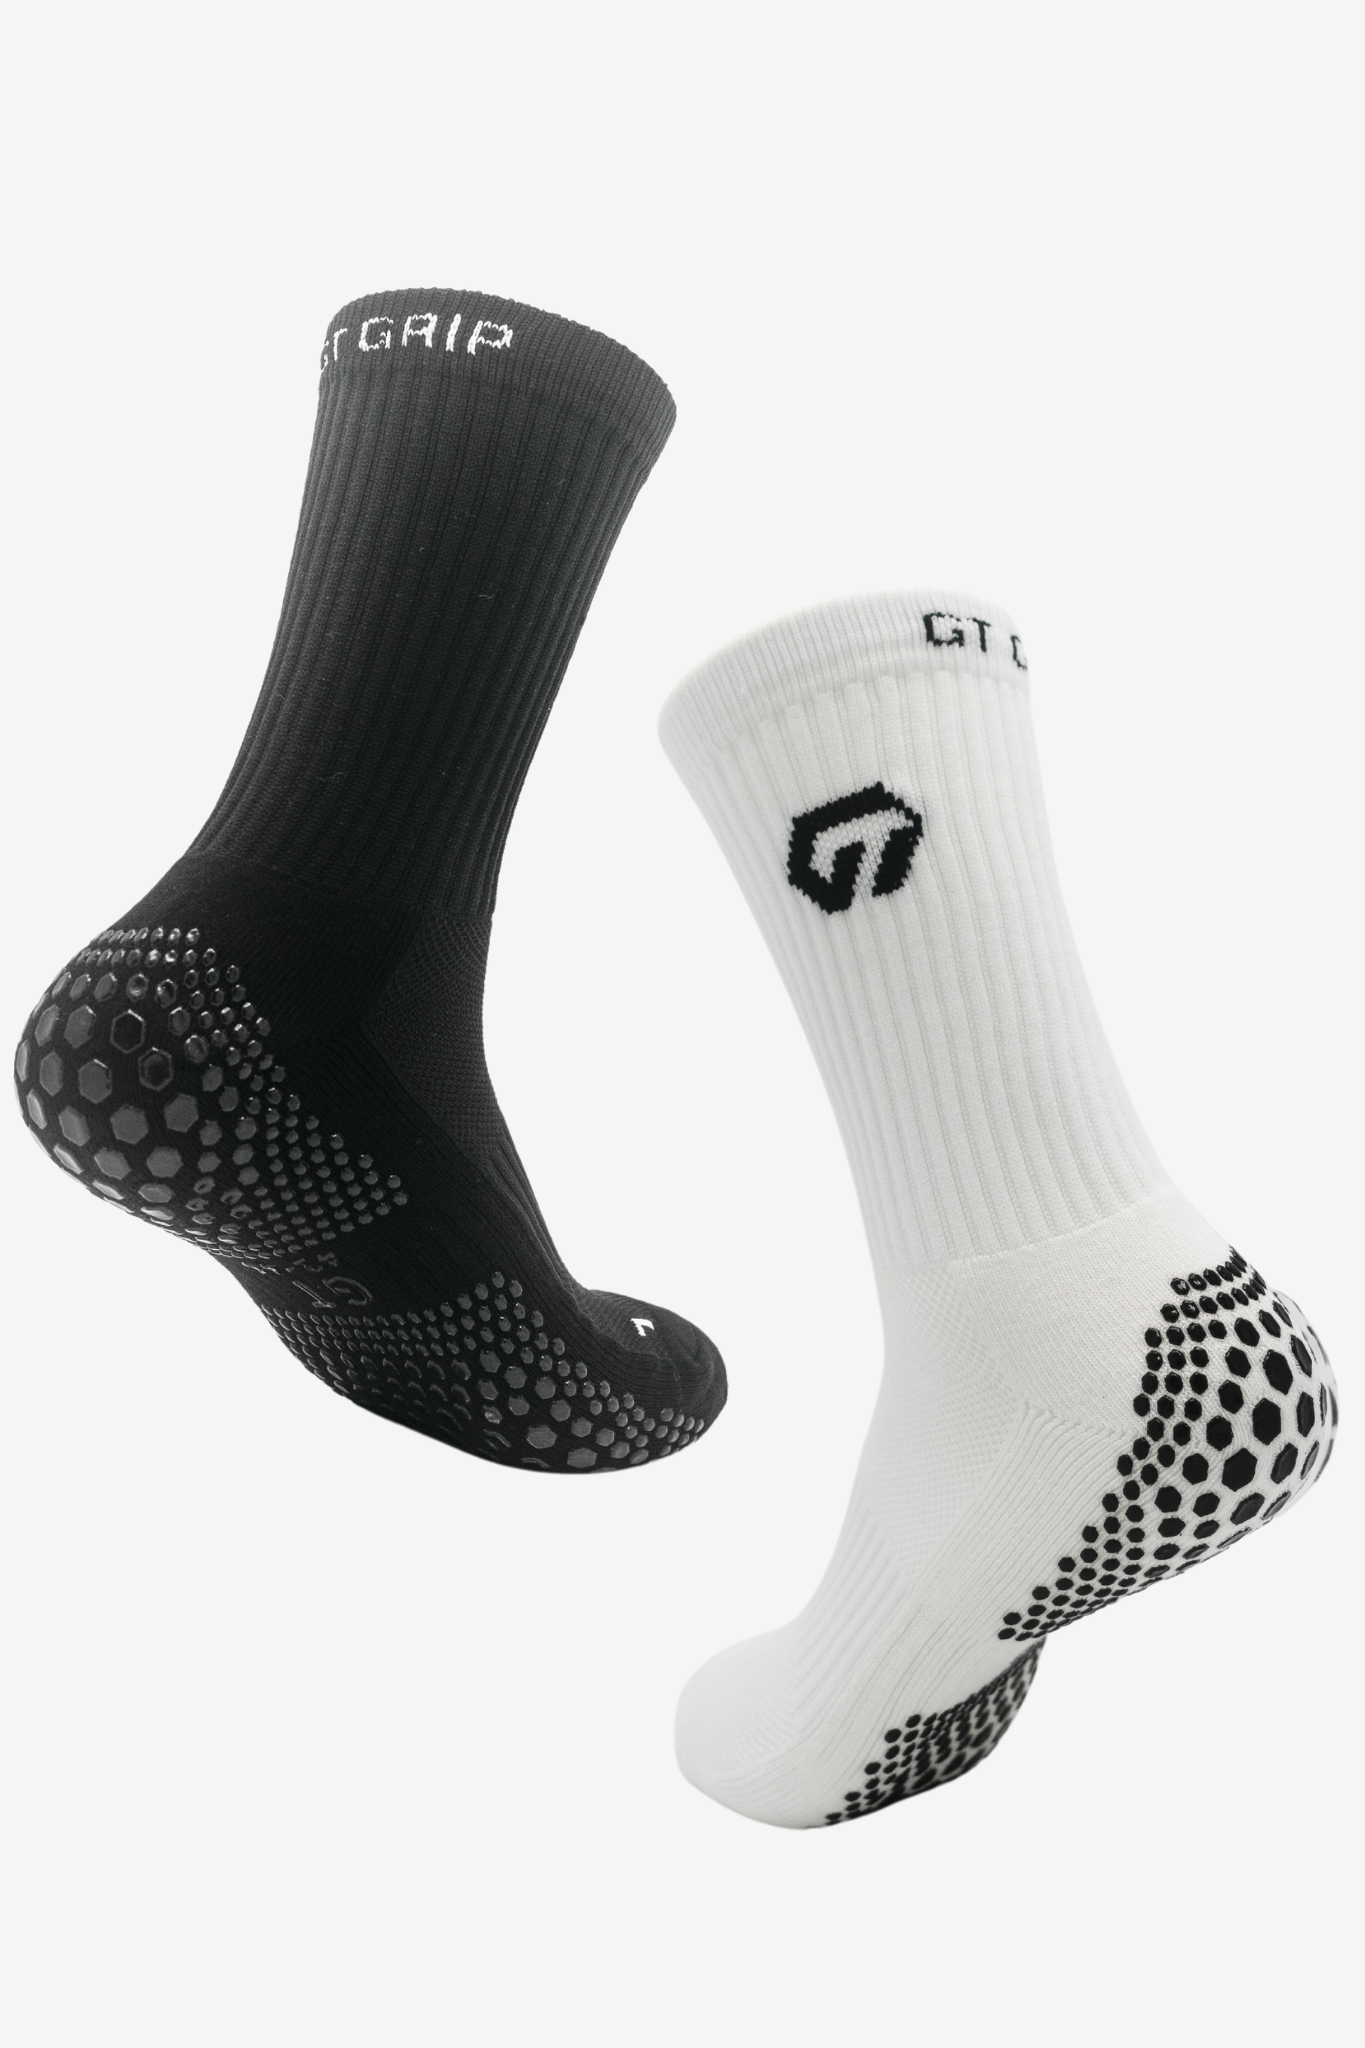 GT GRIP Socks Crew Performance - White and Black Product Picture